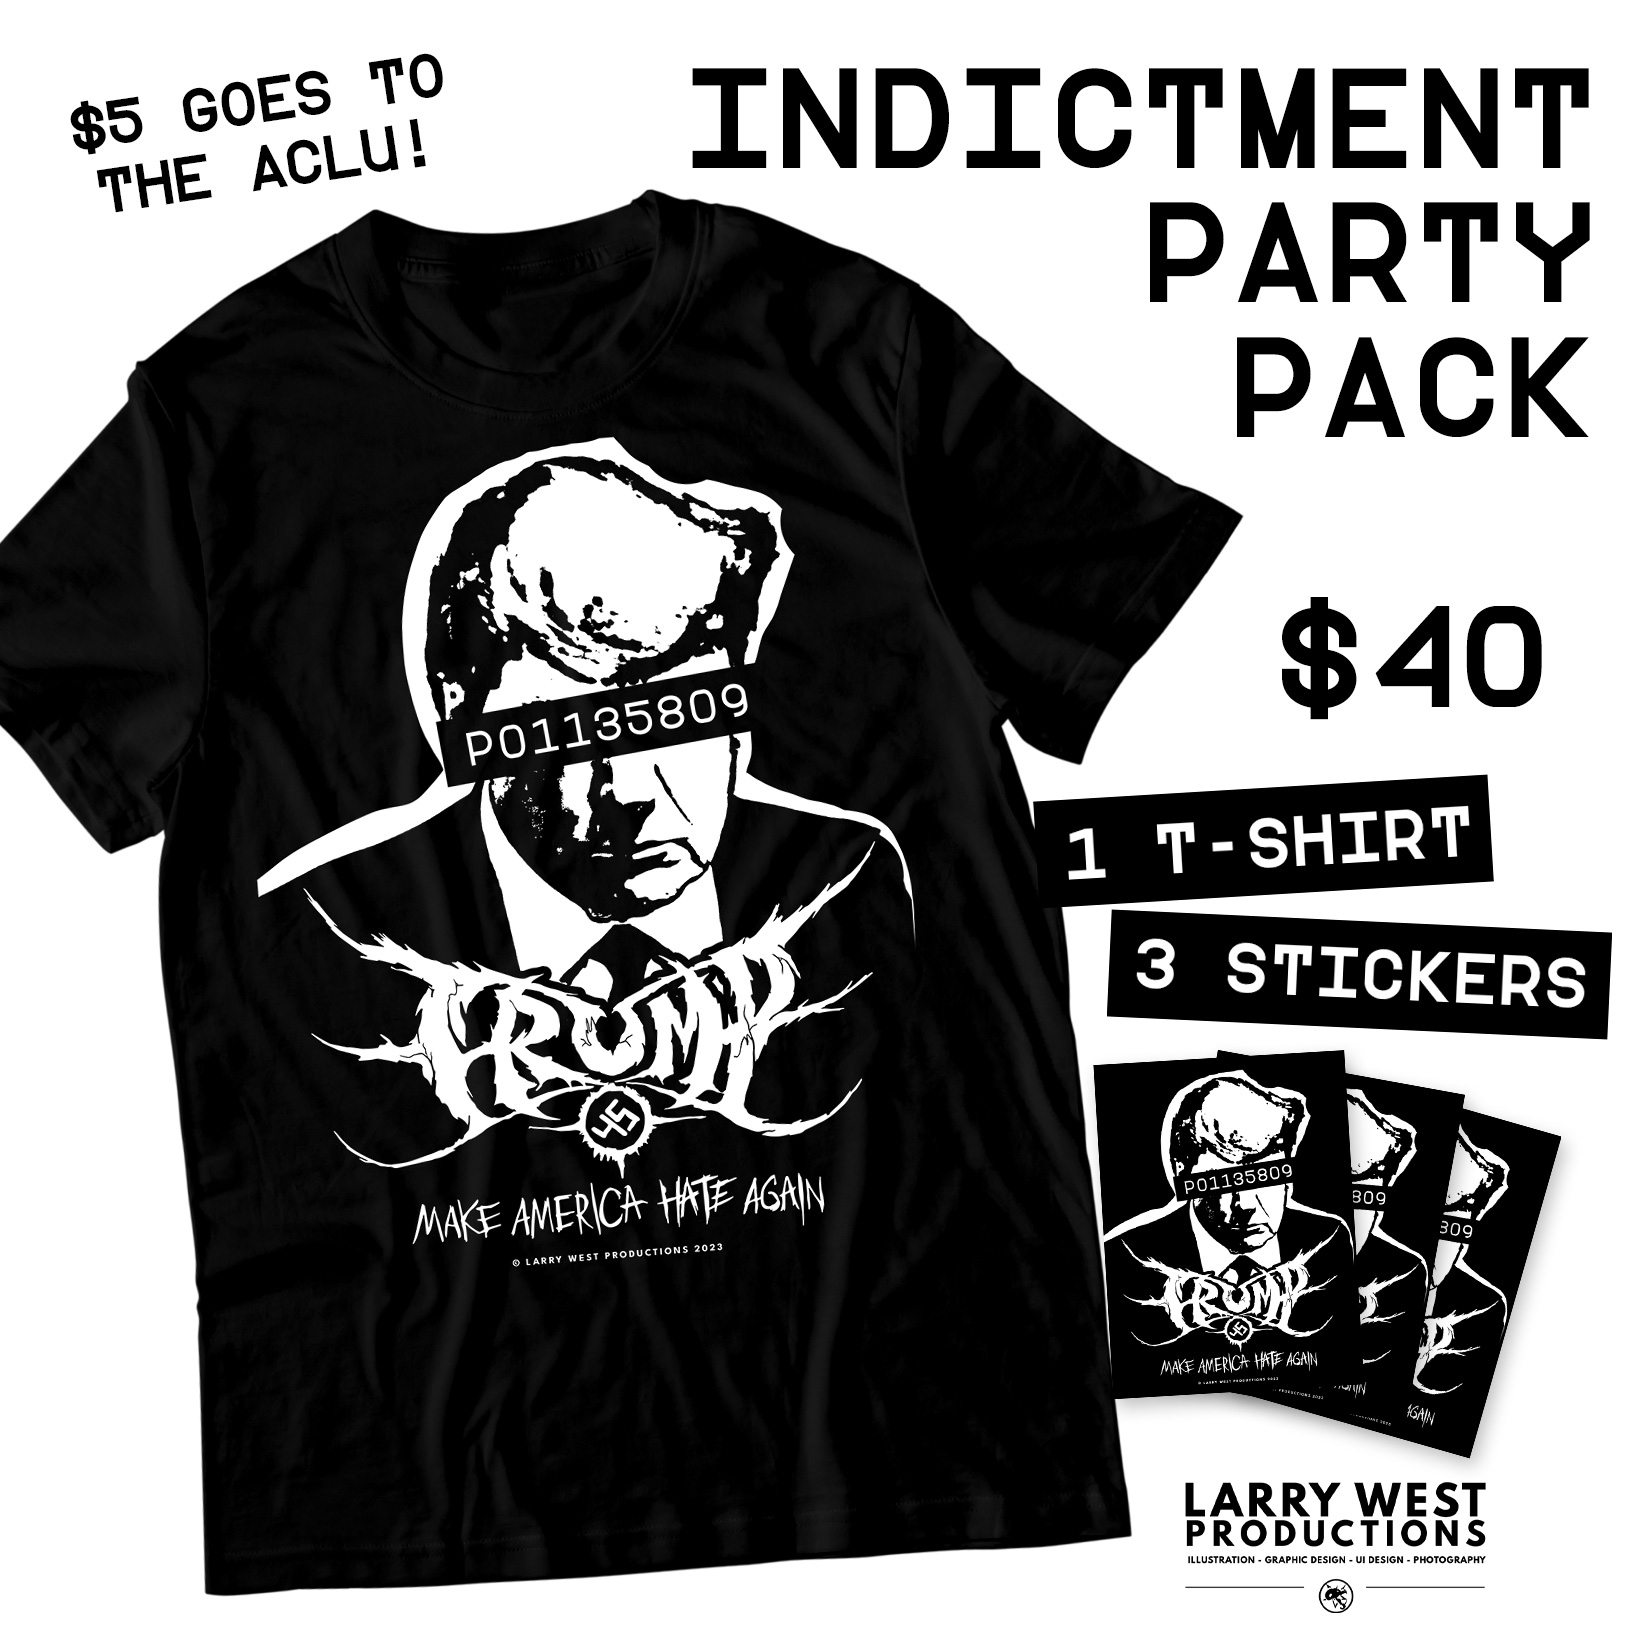 Trump Prisoner P01135809 - Special Indictment Party Pack!